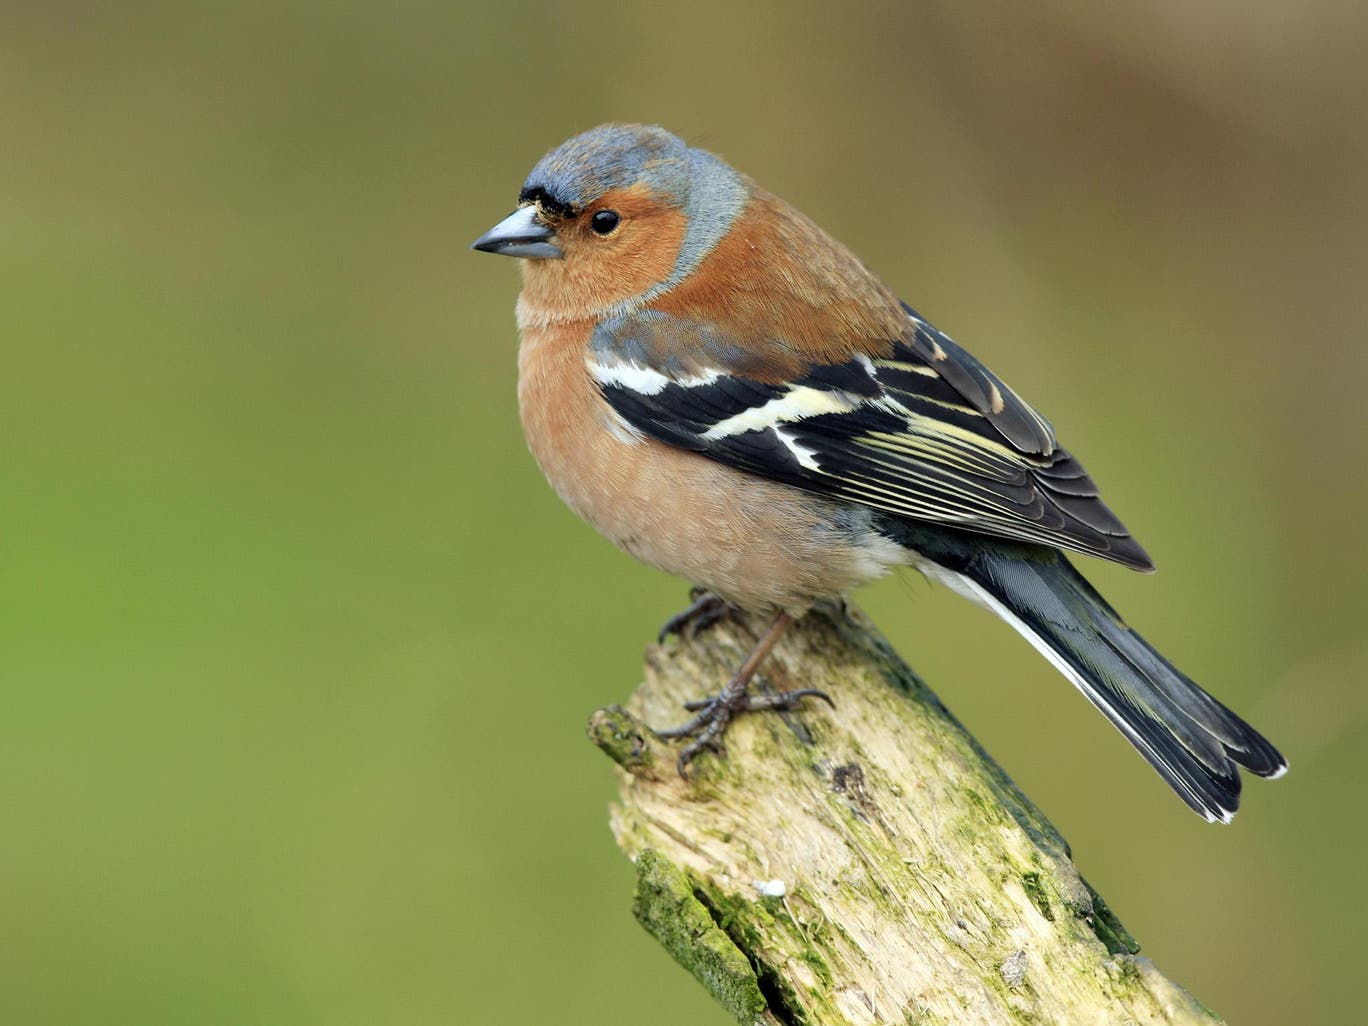 Numbers of Chaffinches and Greenfinches had declined in recent years